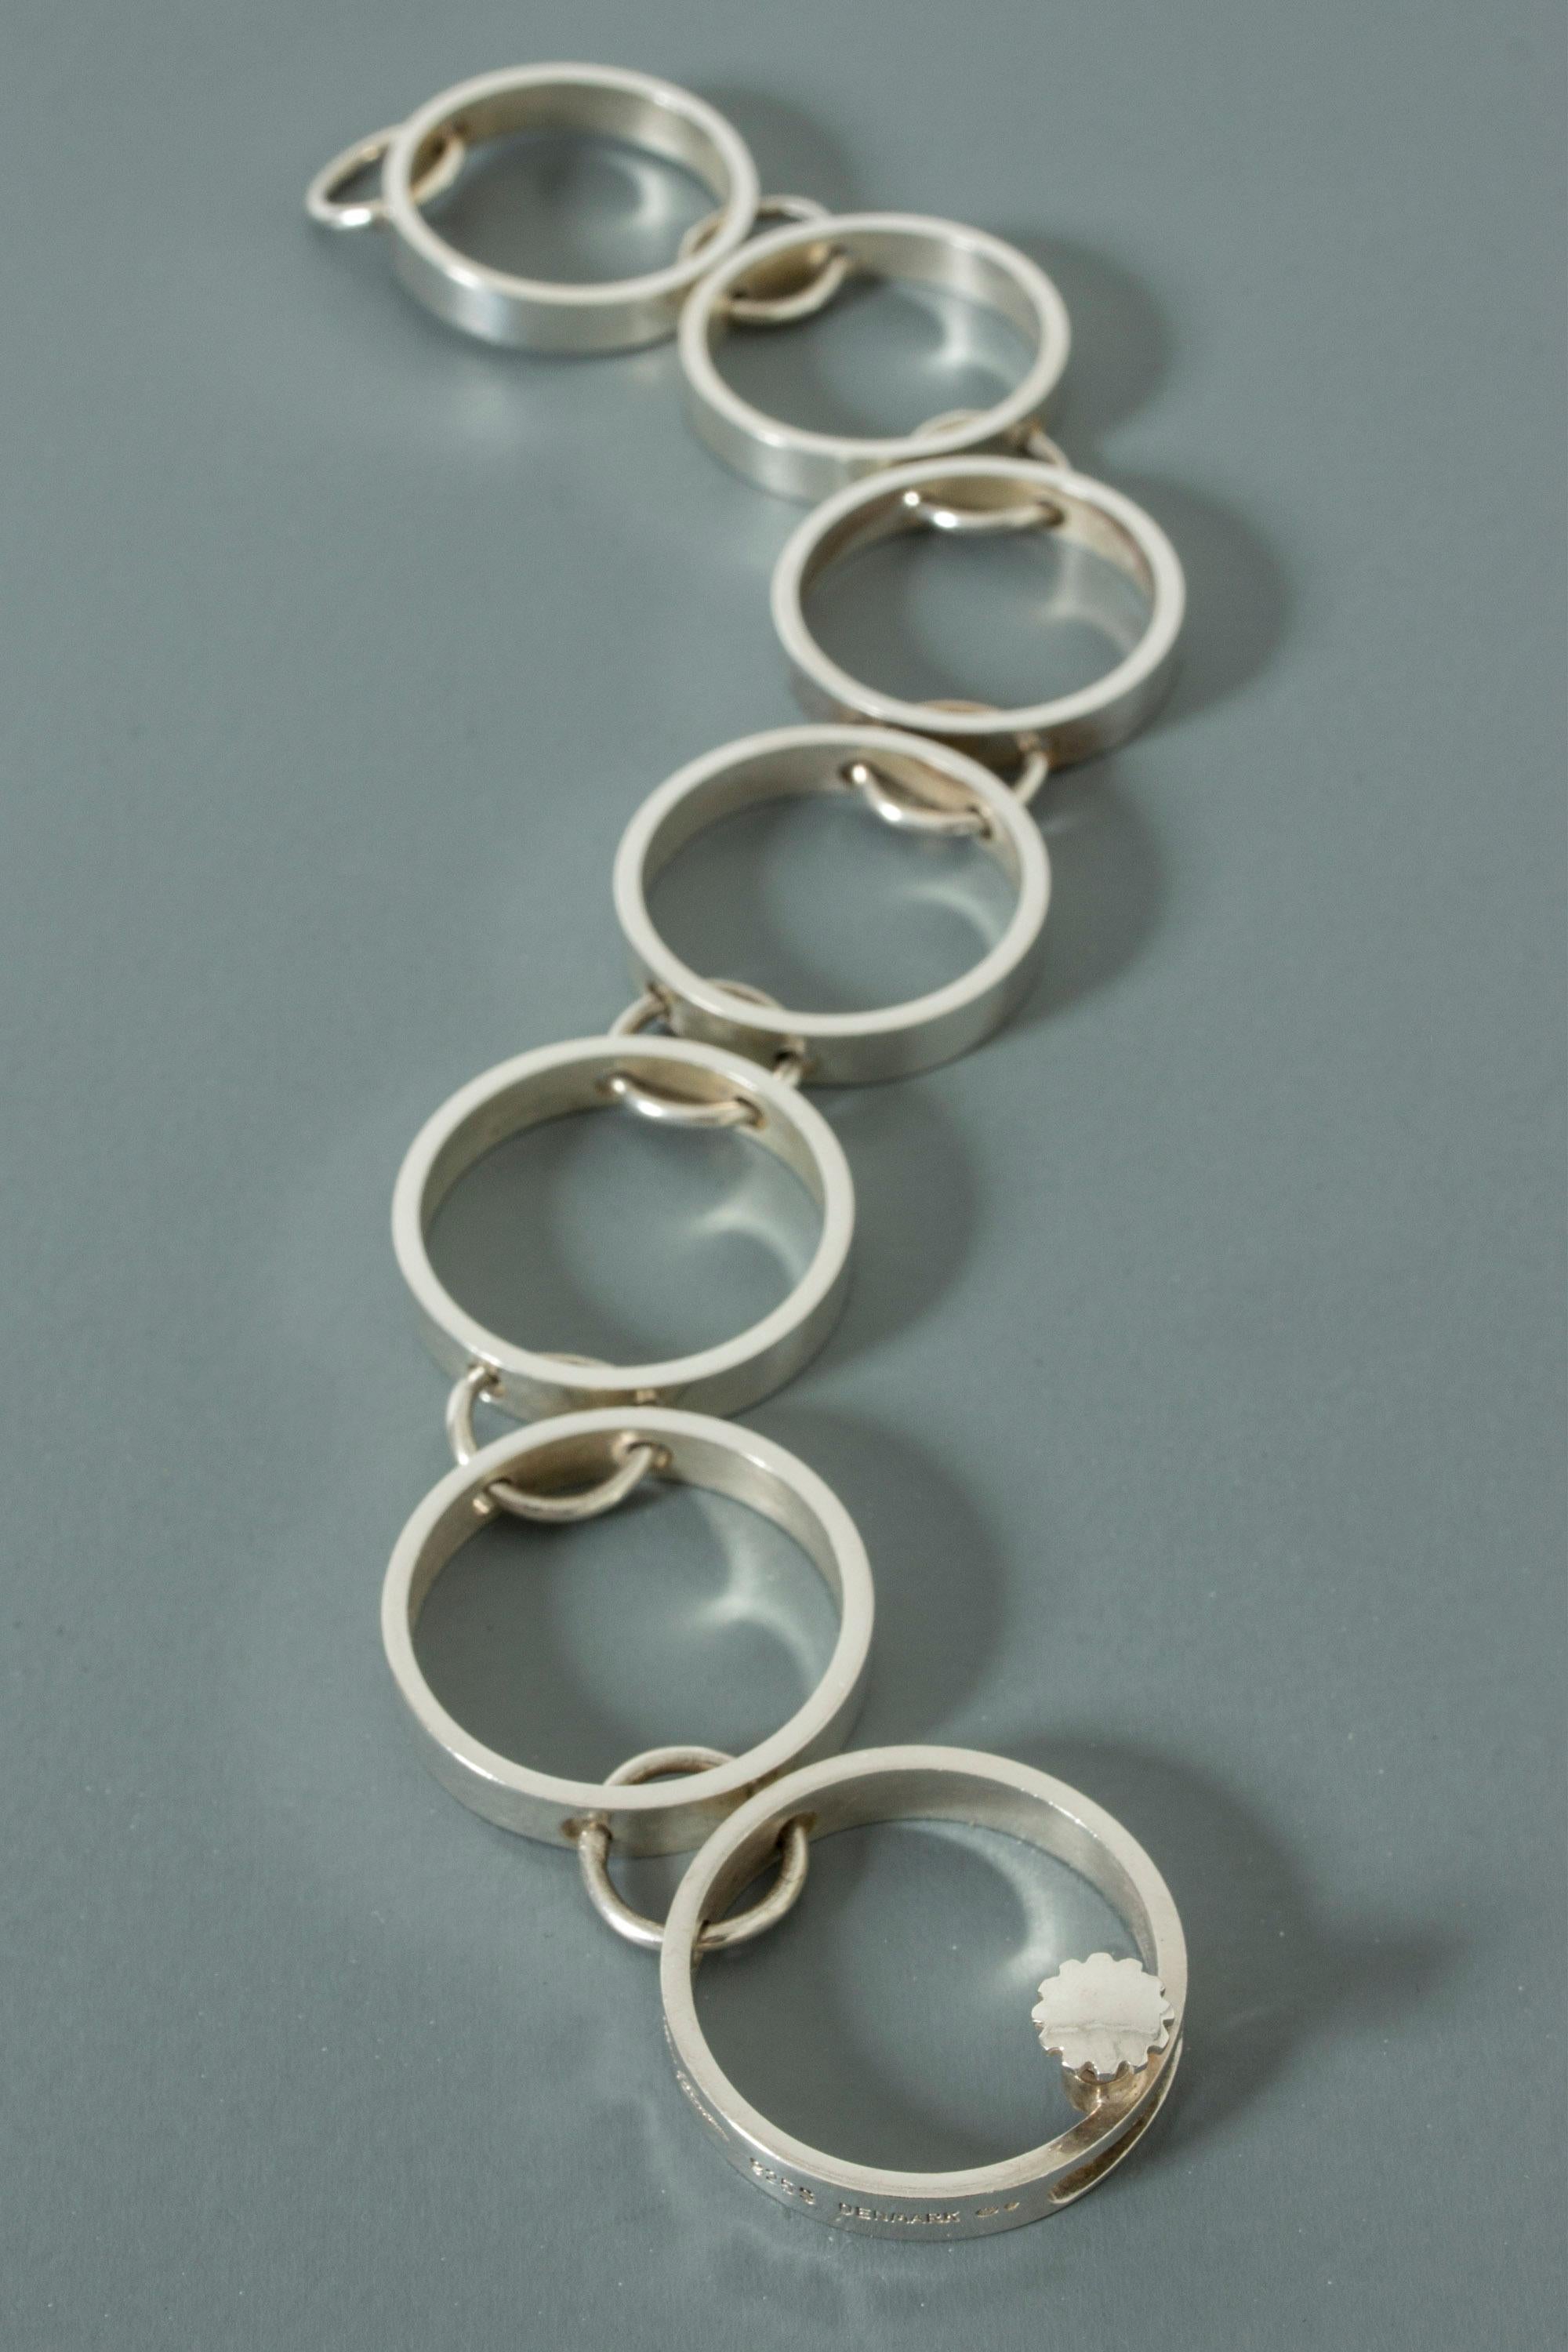 Expressive silver bracelet by Bent Gabrielsen Pedersen, made from large, linked hoops. Elegant, decorative screw lock. Very graphic design in thick silver quality.